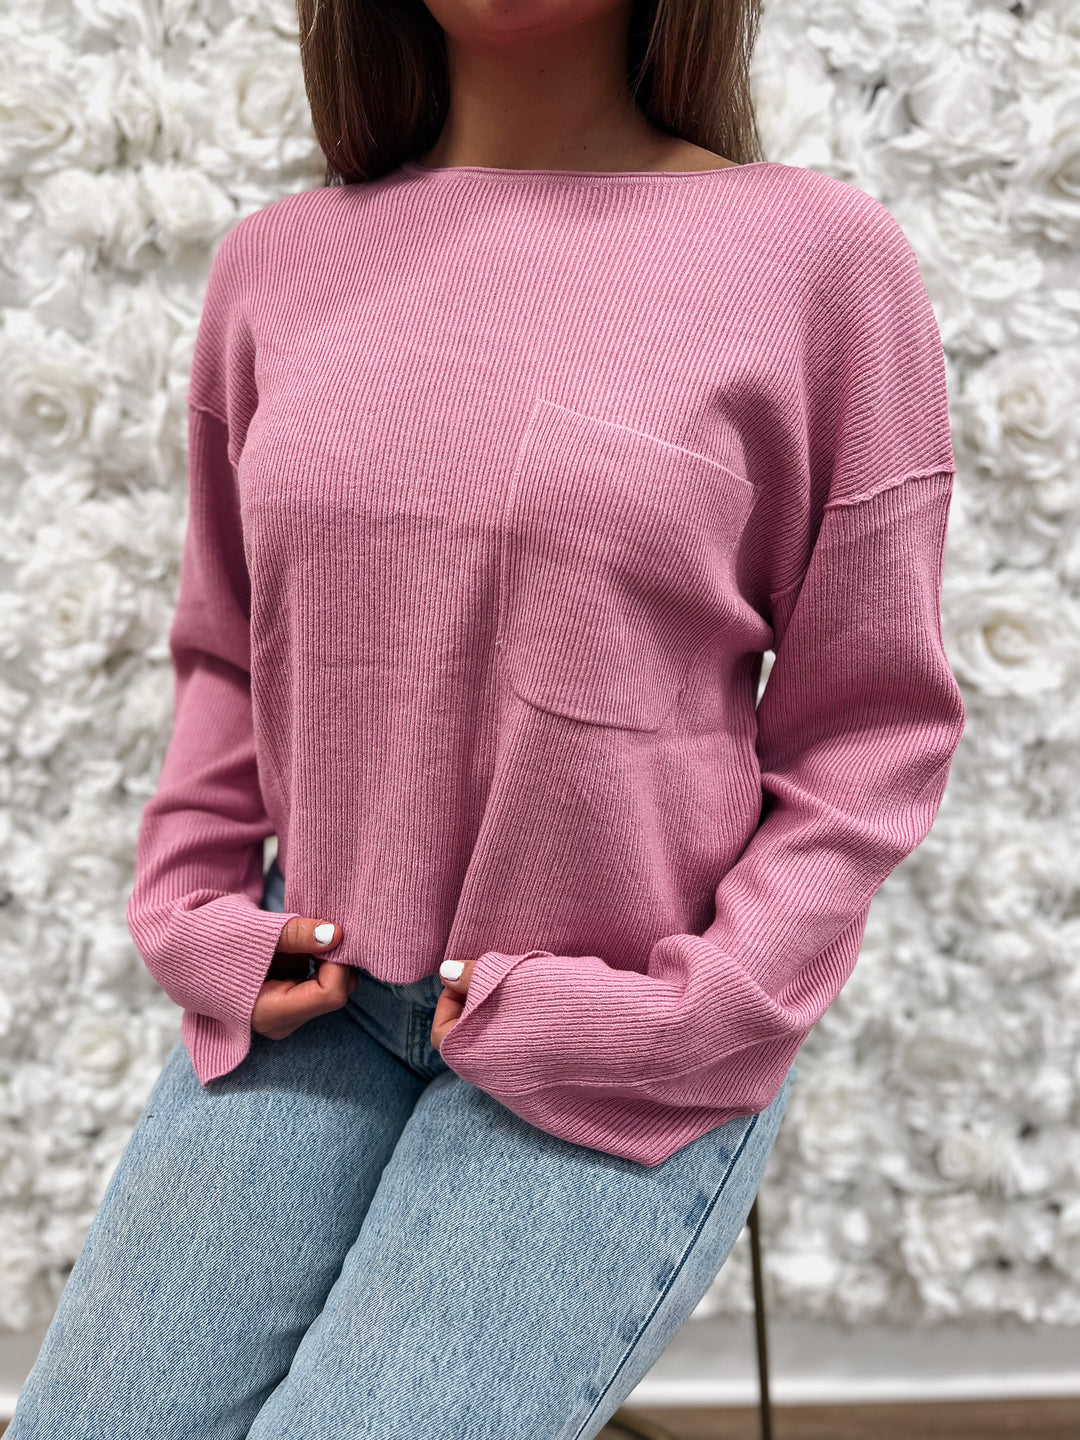 Anything But Basic Sweater - Sienna Sky Boutique